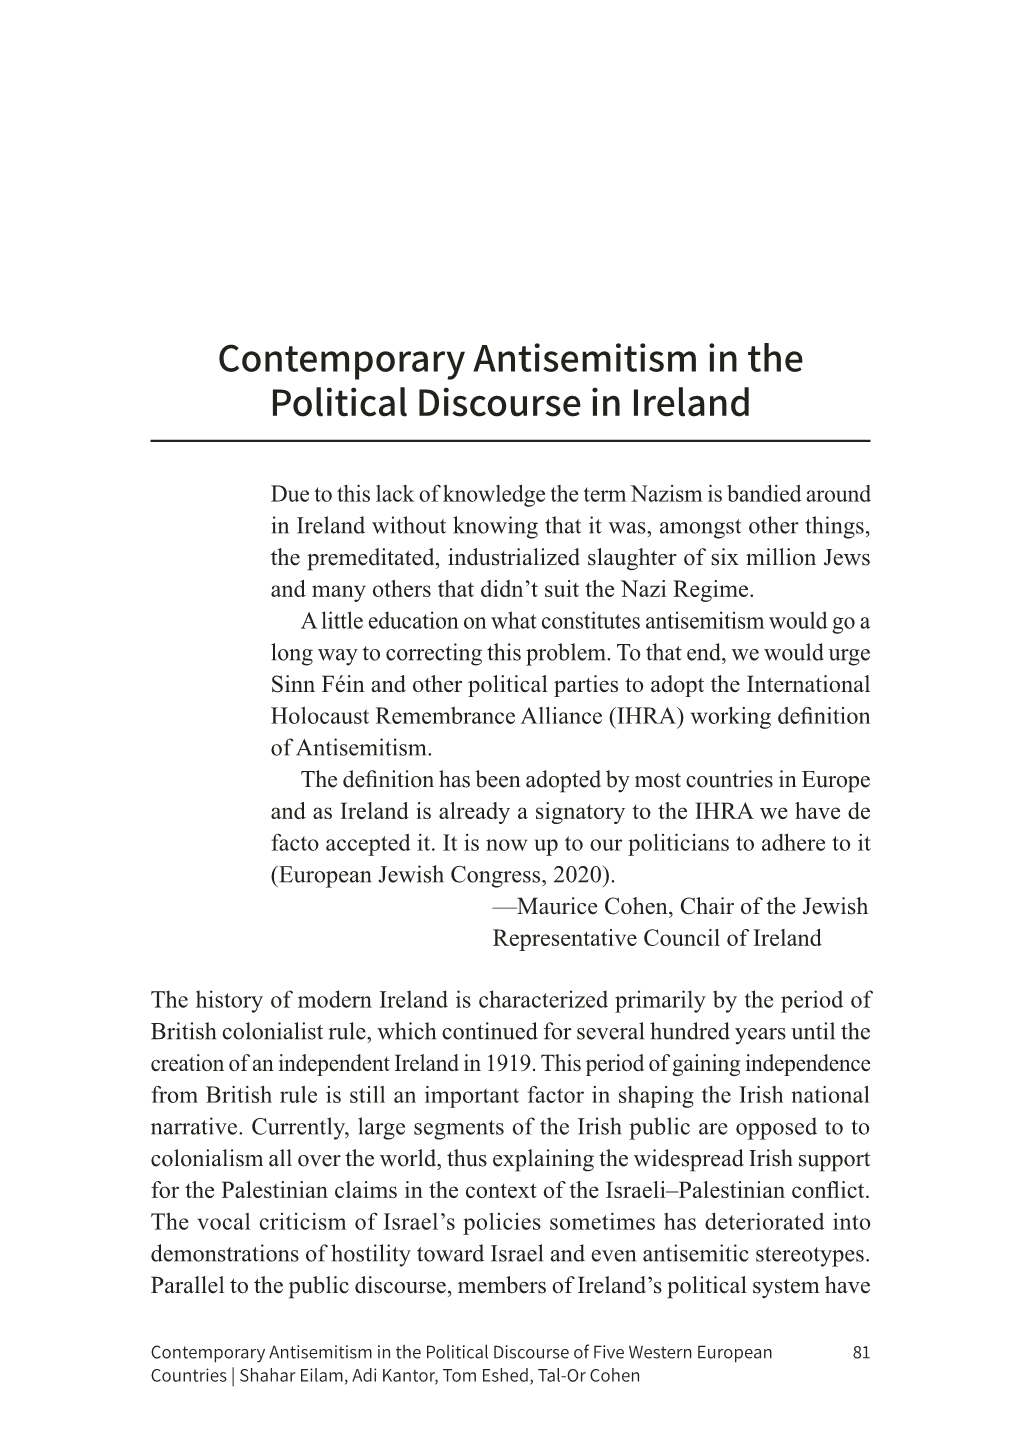 Contemporary Antisemitism in the Political Discourse in Ireland